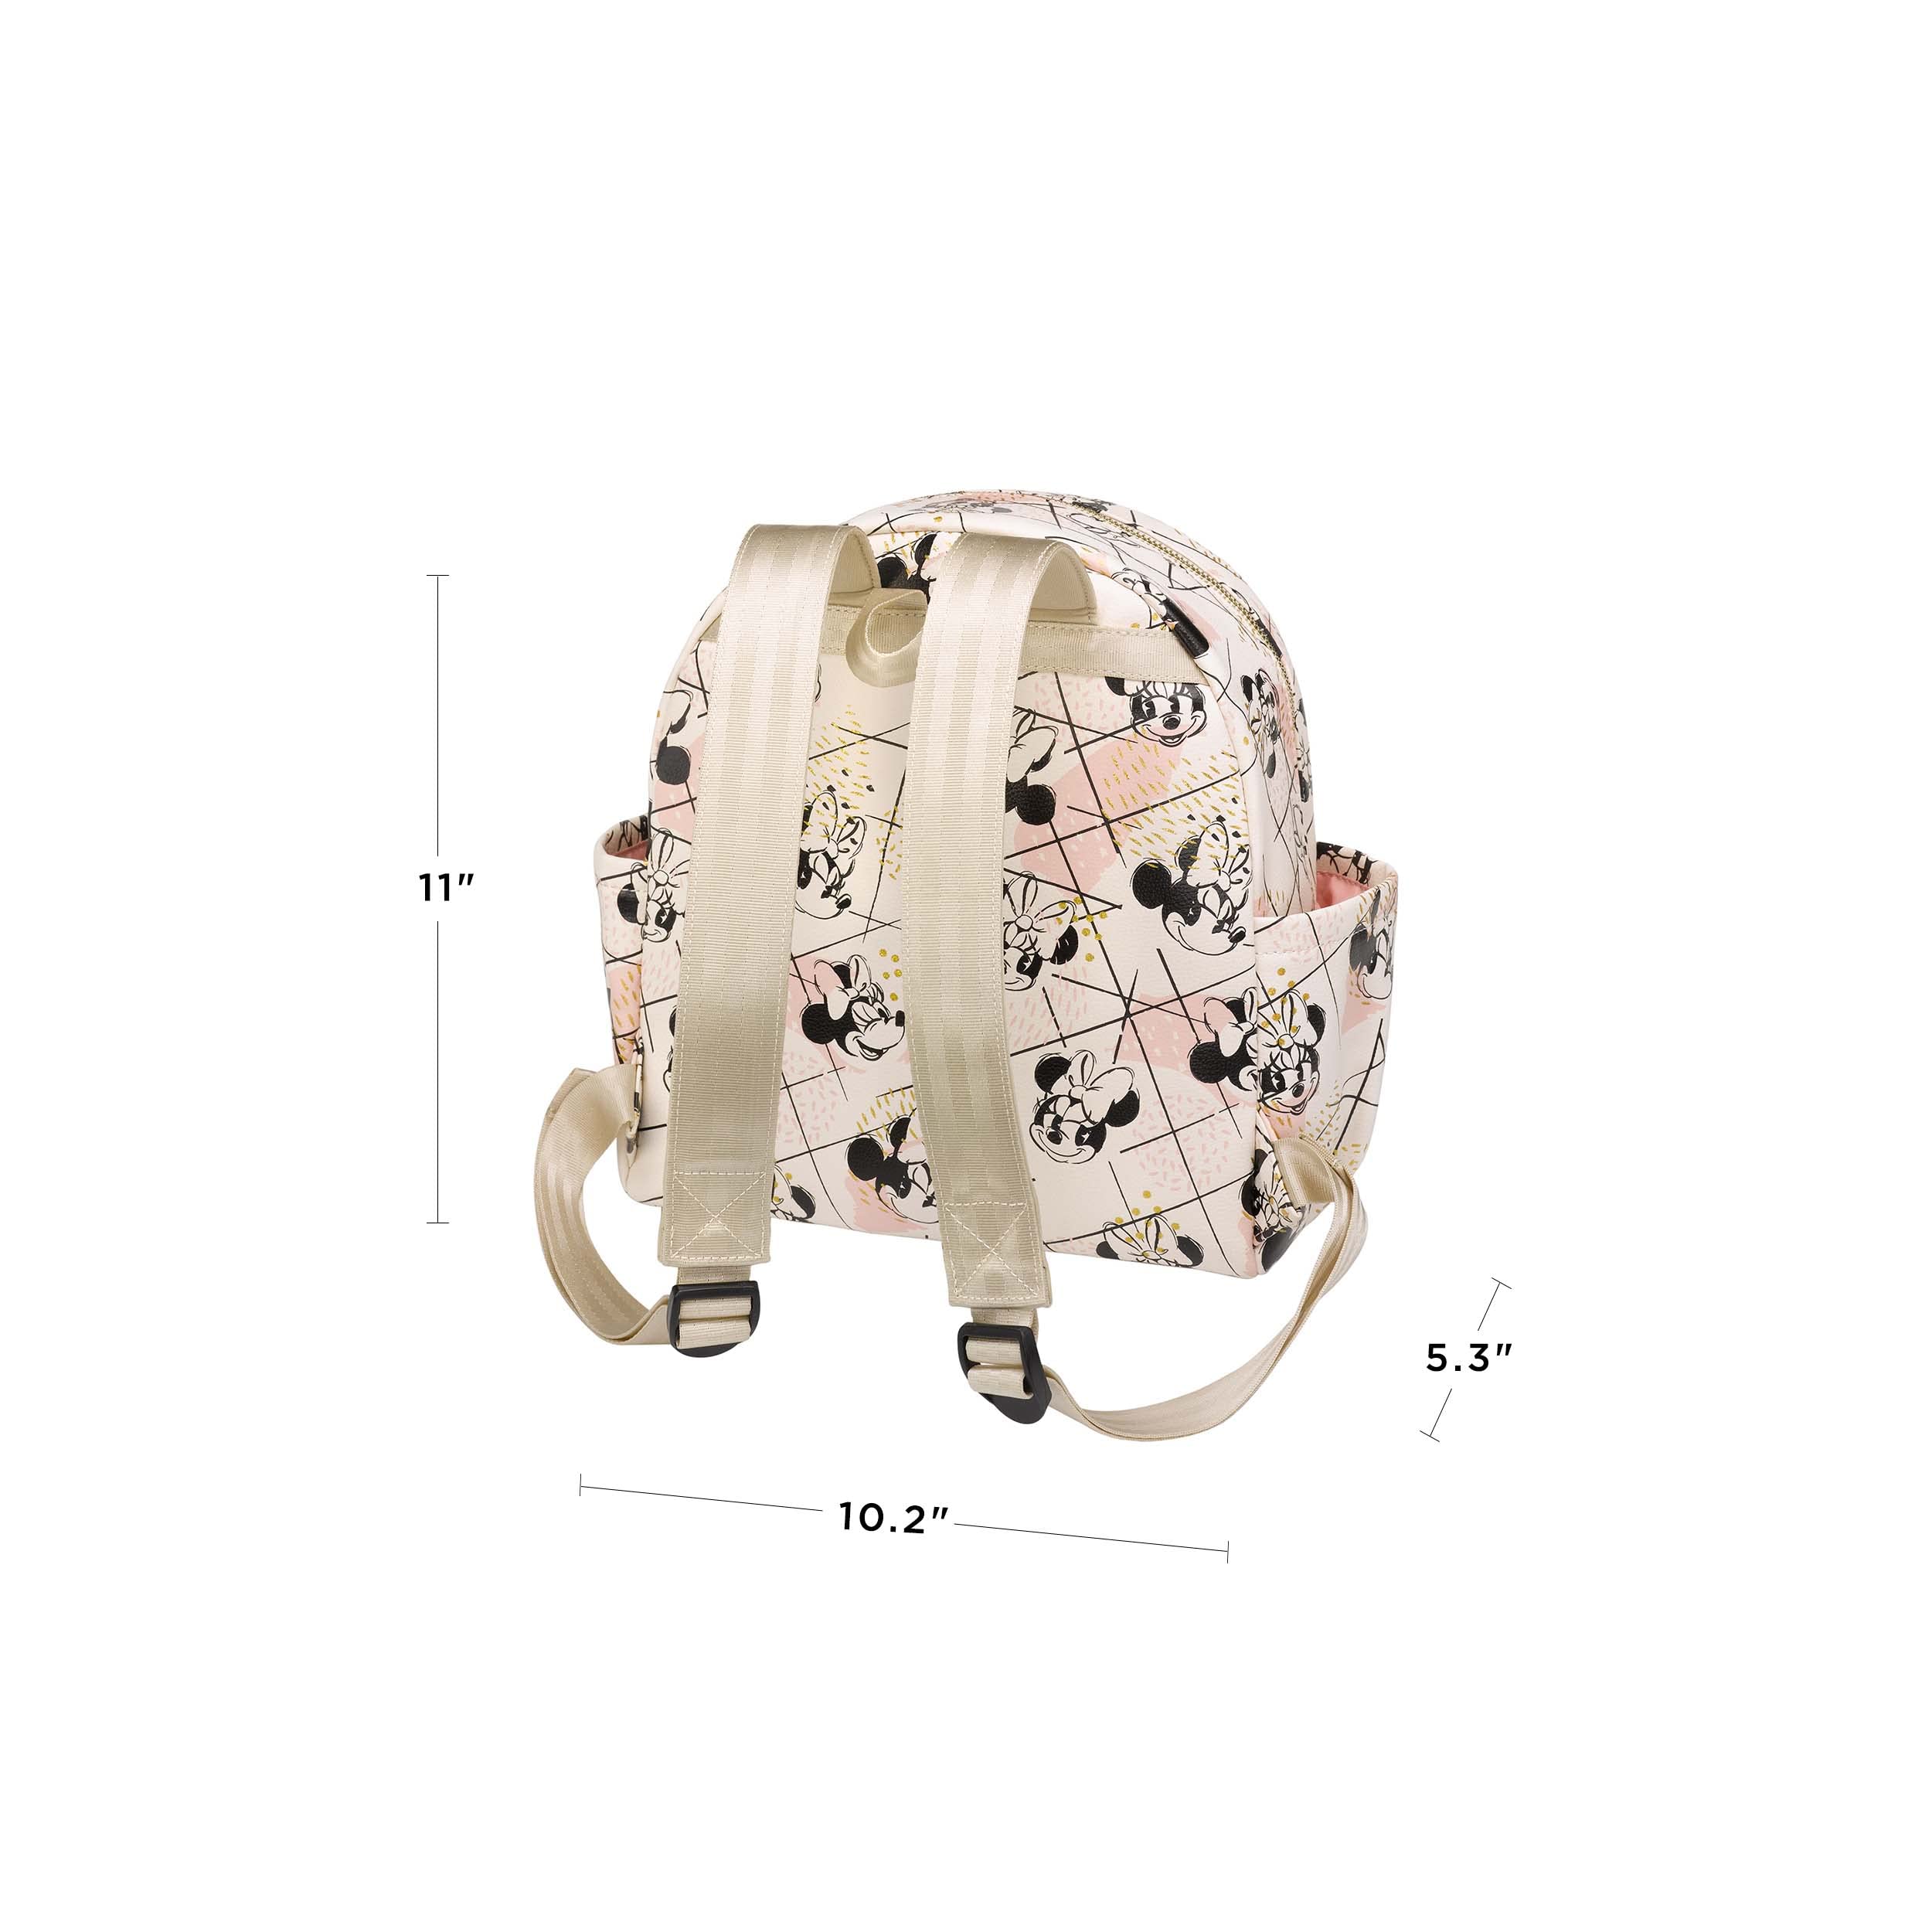 Petunia Pickle Bottom Mini Backpack | Diaper Bag Backpack for Parents | Stylish Bag and Organizer | Compact Backpack for On The Go Moms and Dads | Shimmery Minnie Mouse